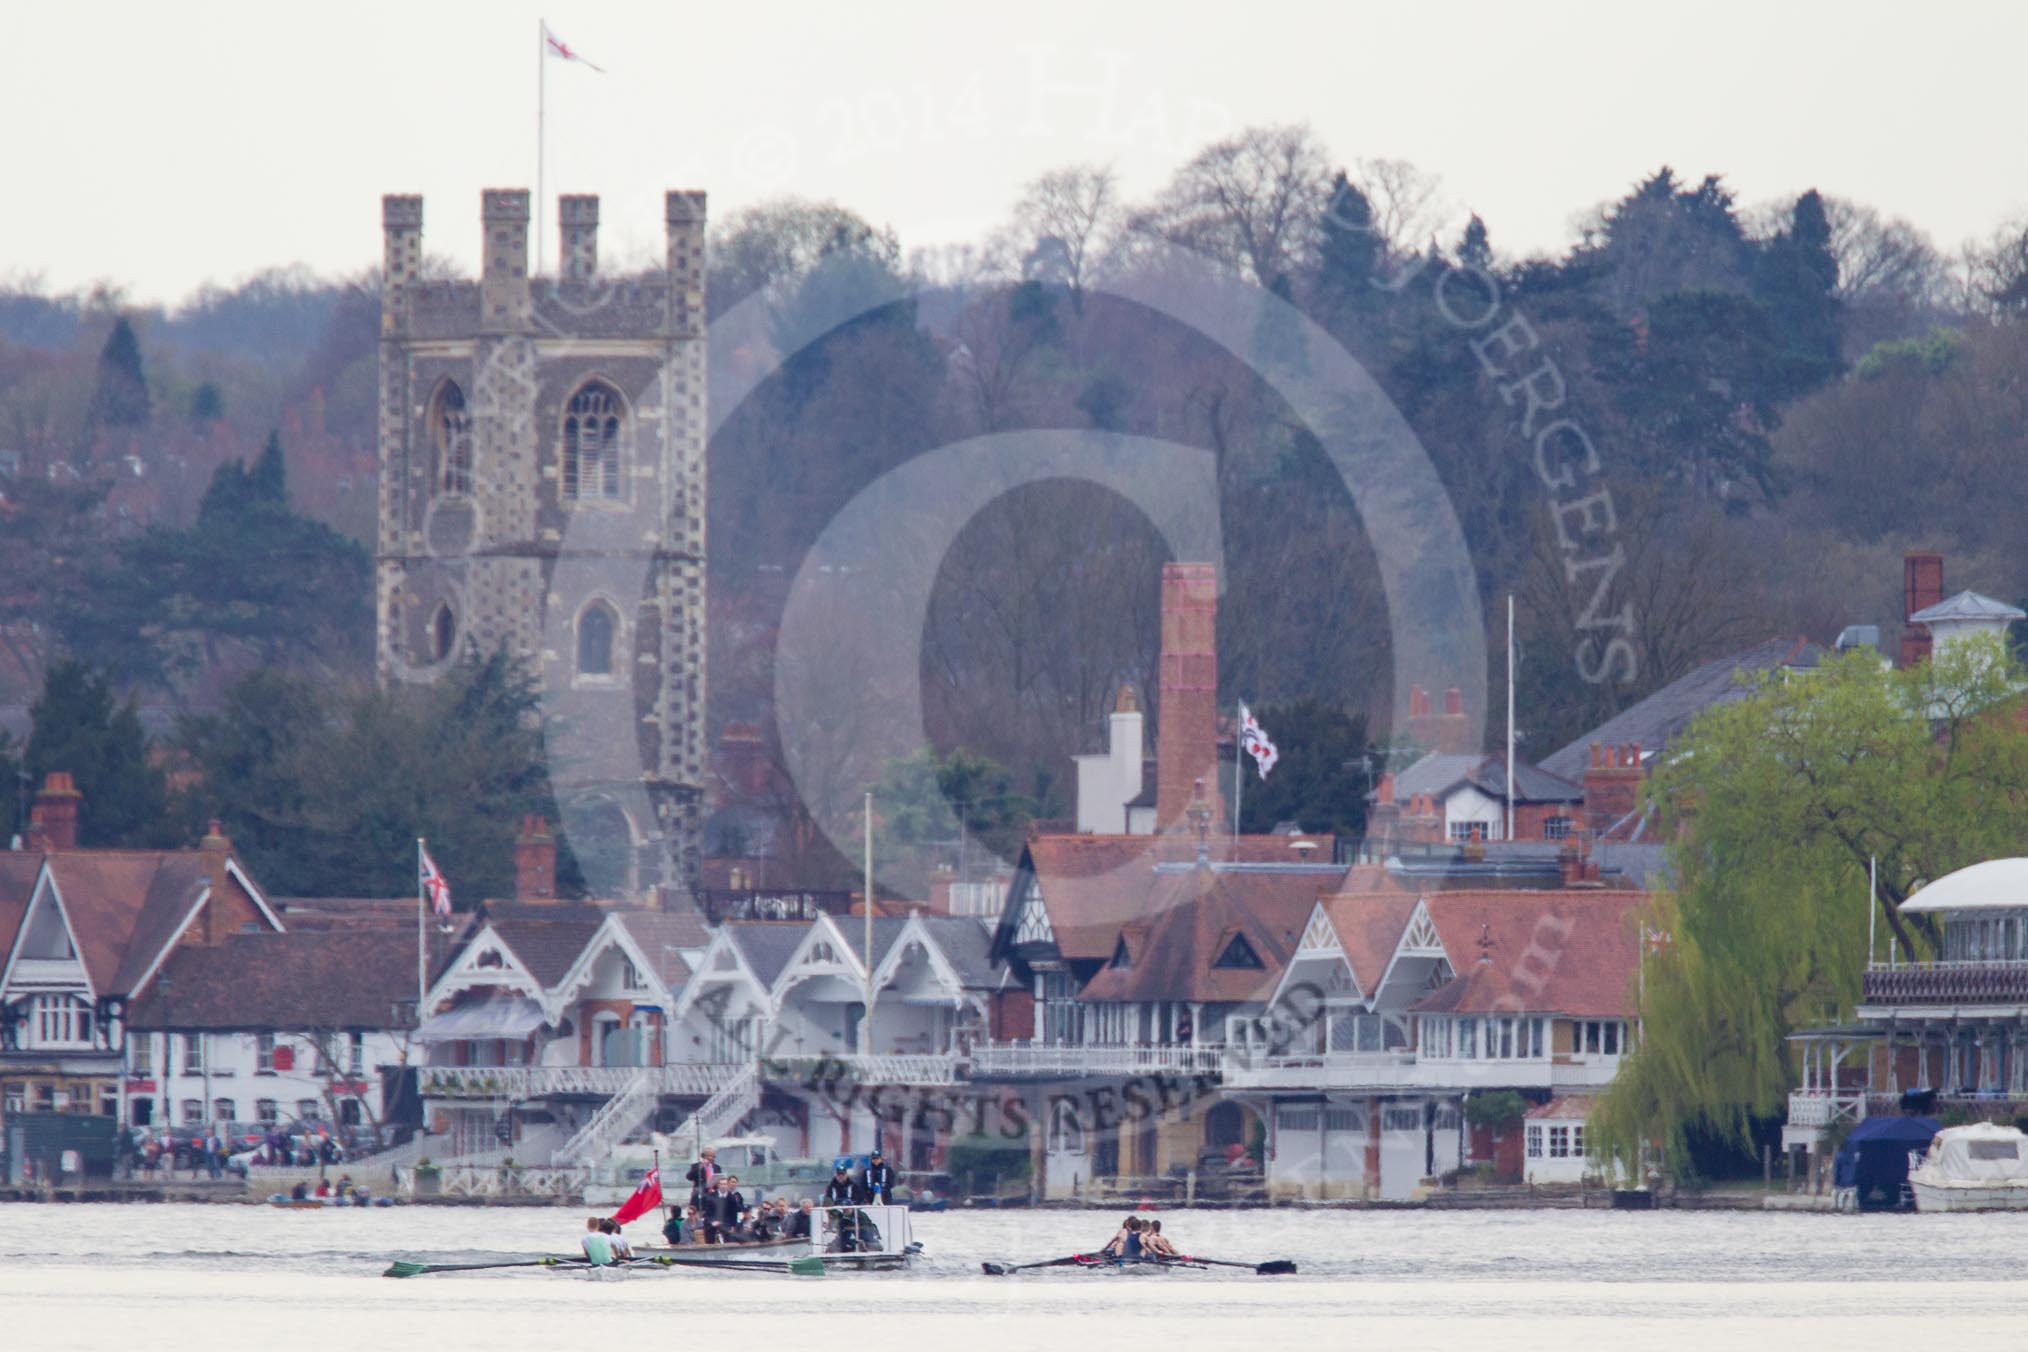 The Women's Boat Race and Henley Boat Races 2014: The start of the Lightweight Men's Boat Race - OULRC vs CULRC, Oxford is on the right (Bucks) side..
River Thames,
Henley-on-Thames,
Buckinghamshire,
United Kingdom,
on 30 March 2014 at 15:38, image #354